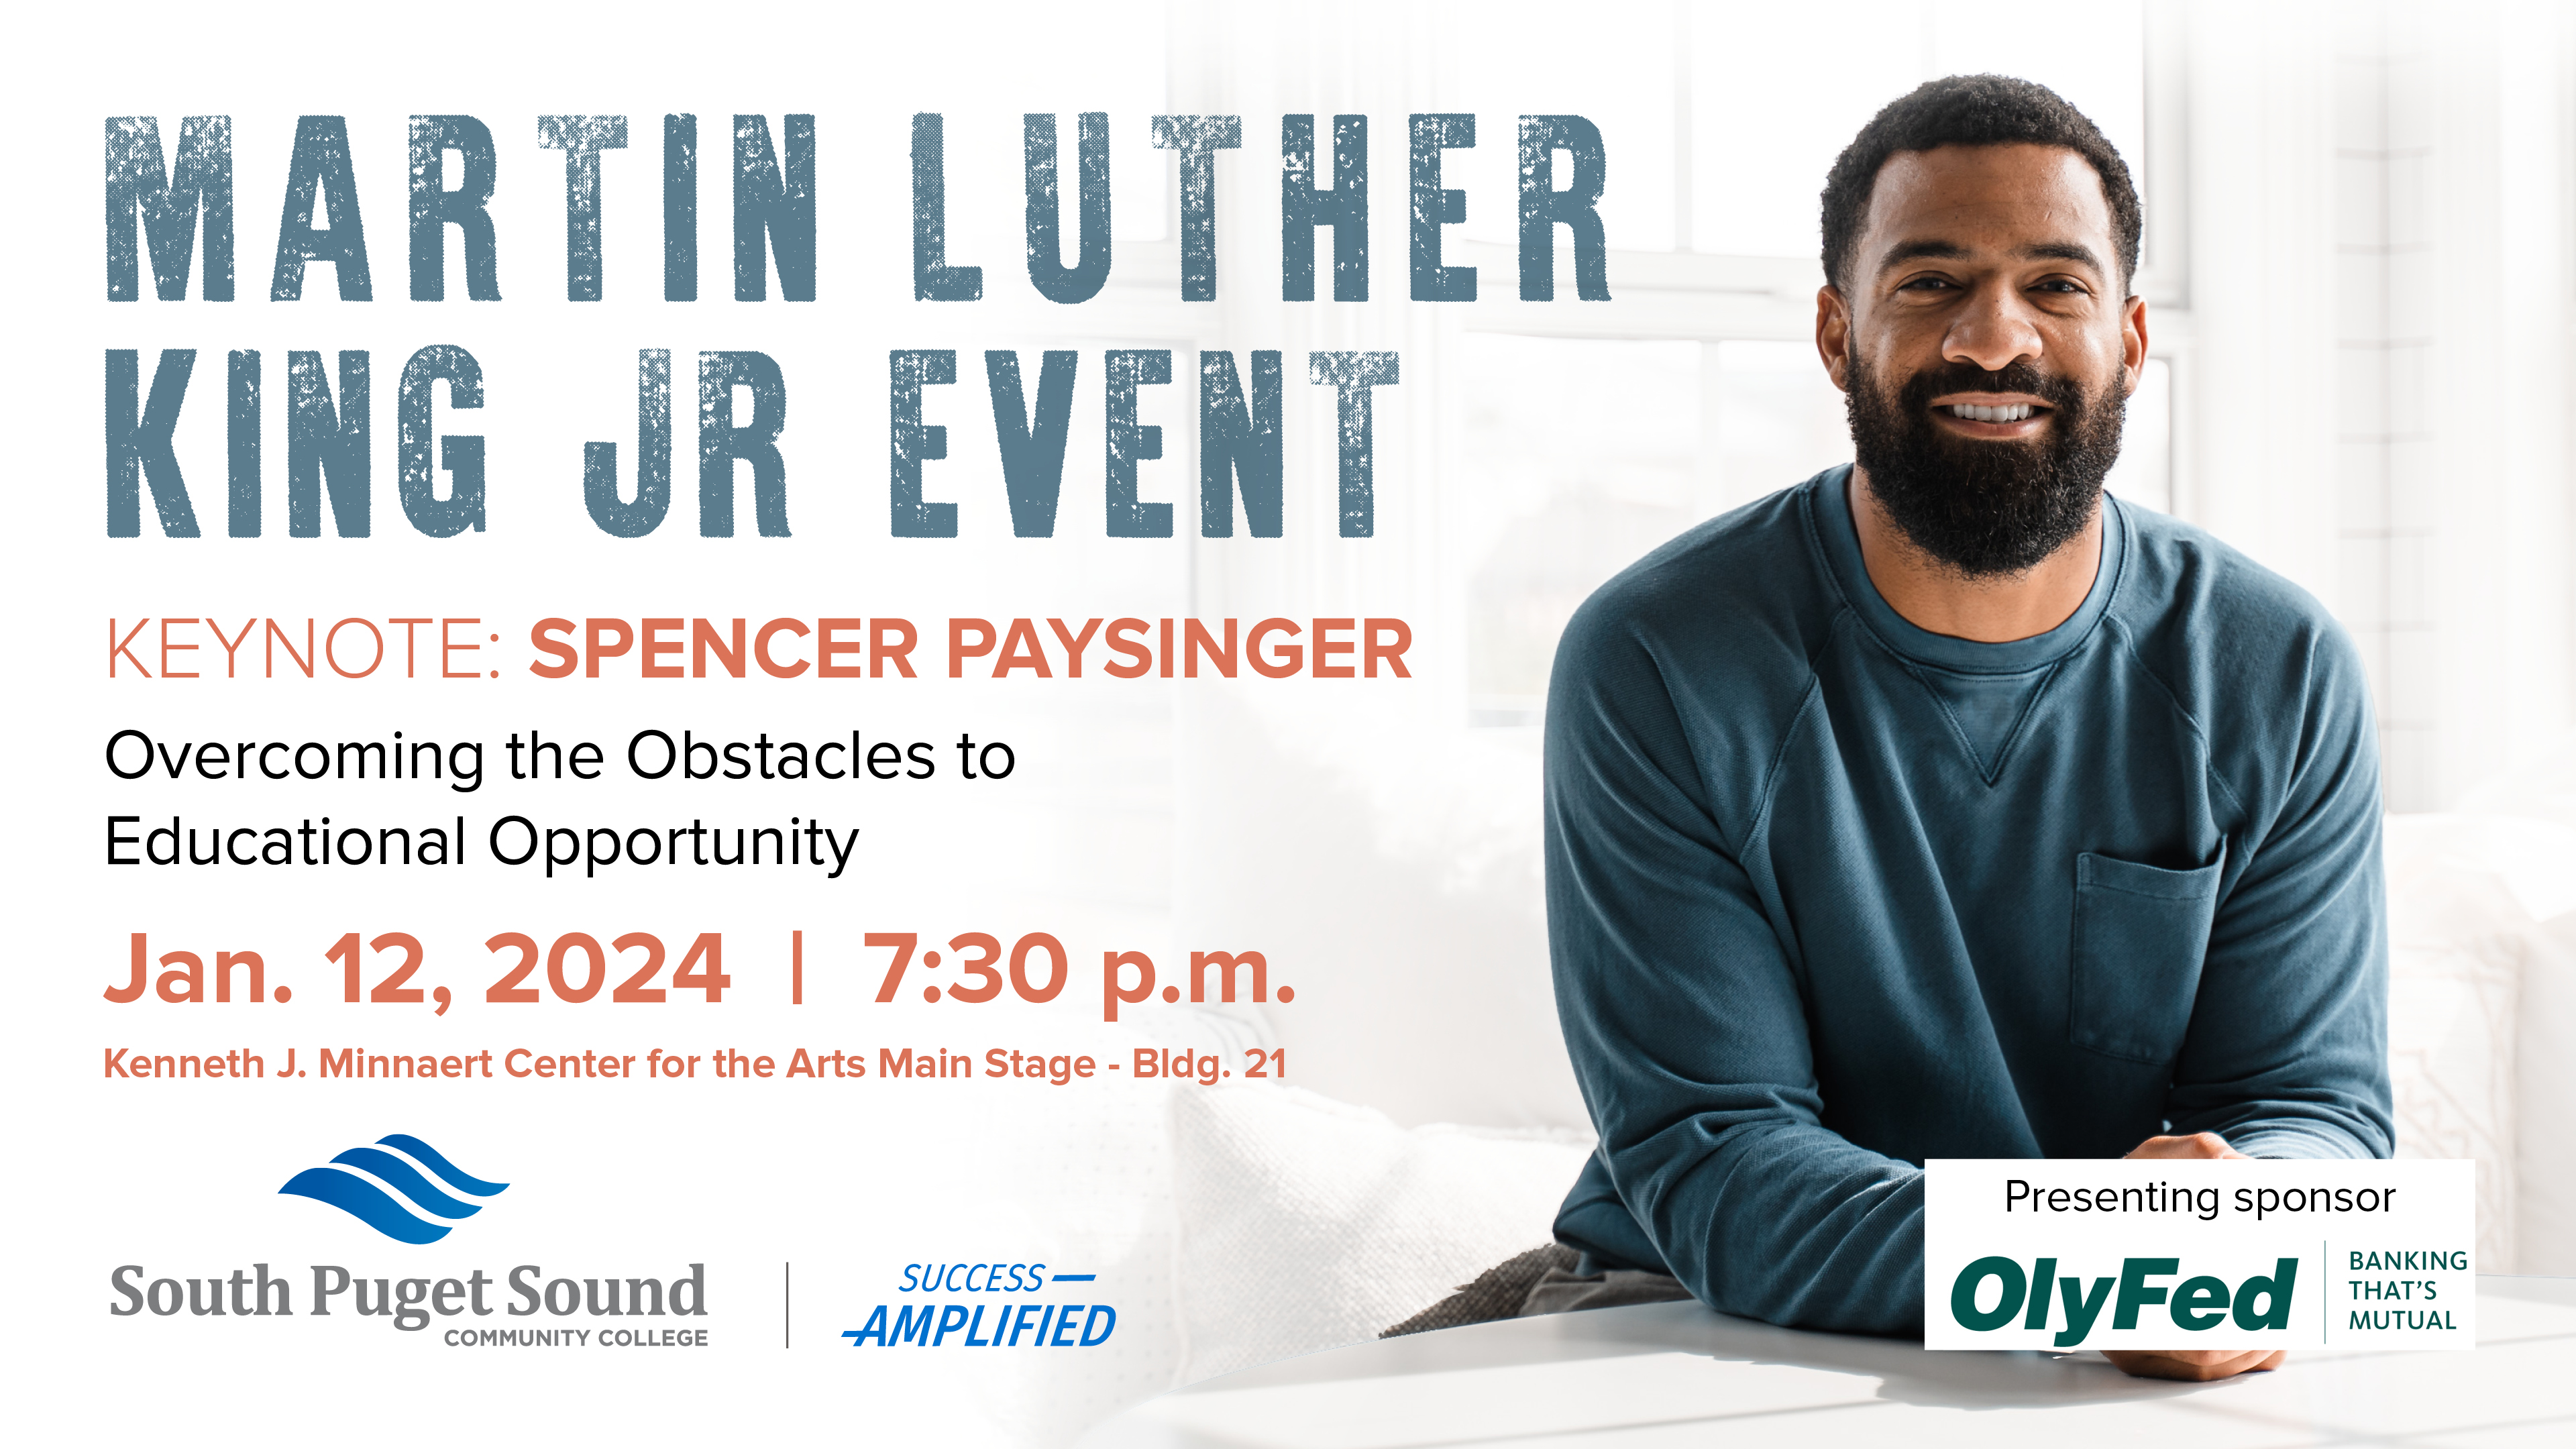 Martin Luther King Jr. Event with Keynote Spencer Paysinger. "Overcoming the Obstacles to Educational Opportunity". Jan. 12, 2024 at 7:30 p.m. in the Kenneth J. Minnaert Center for the Arts Main Stage in Building 21.